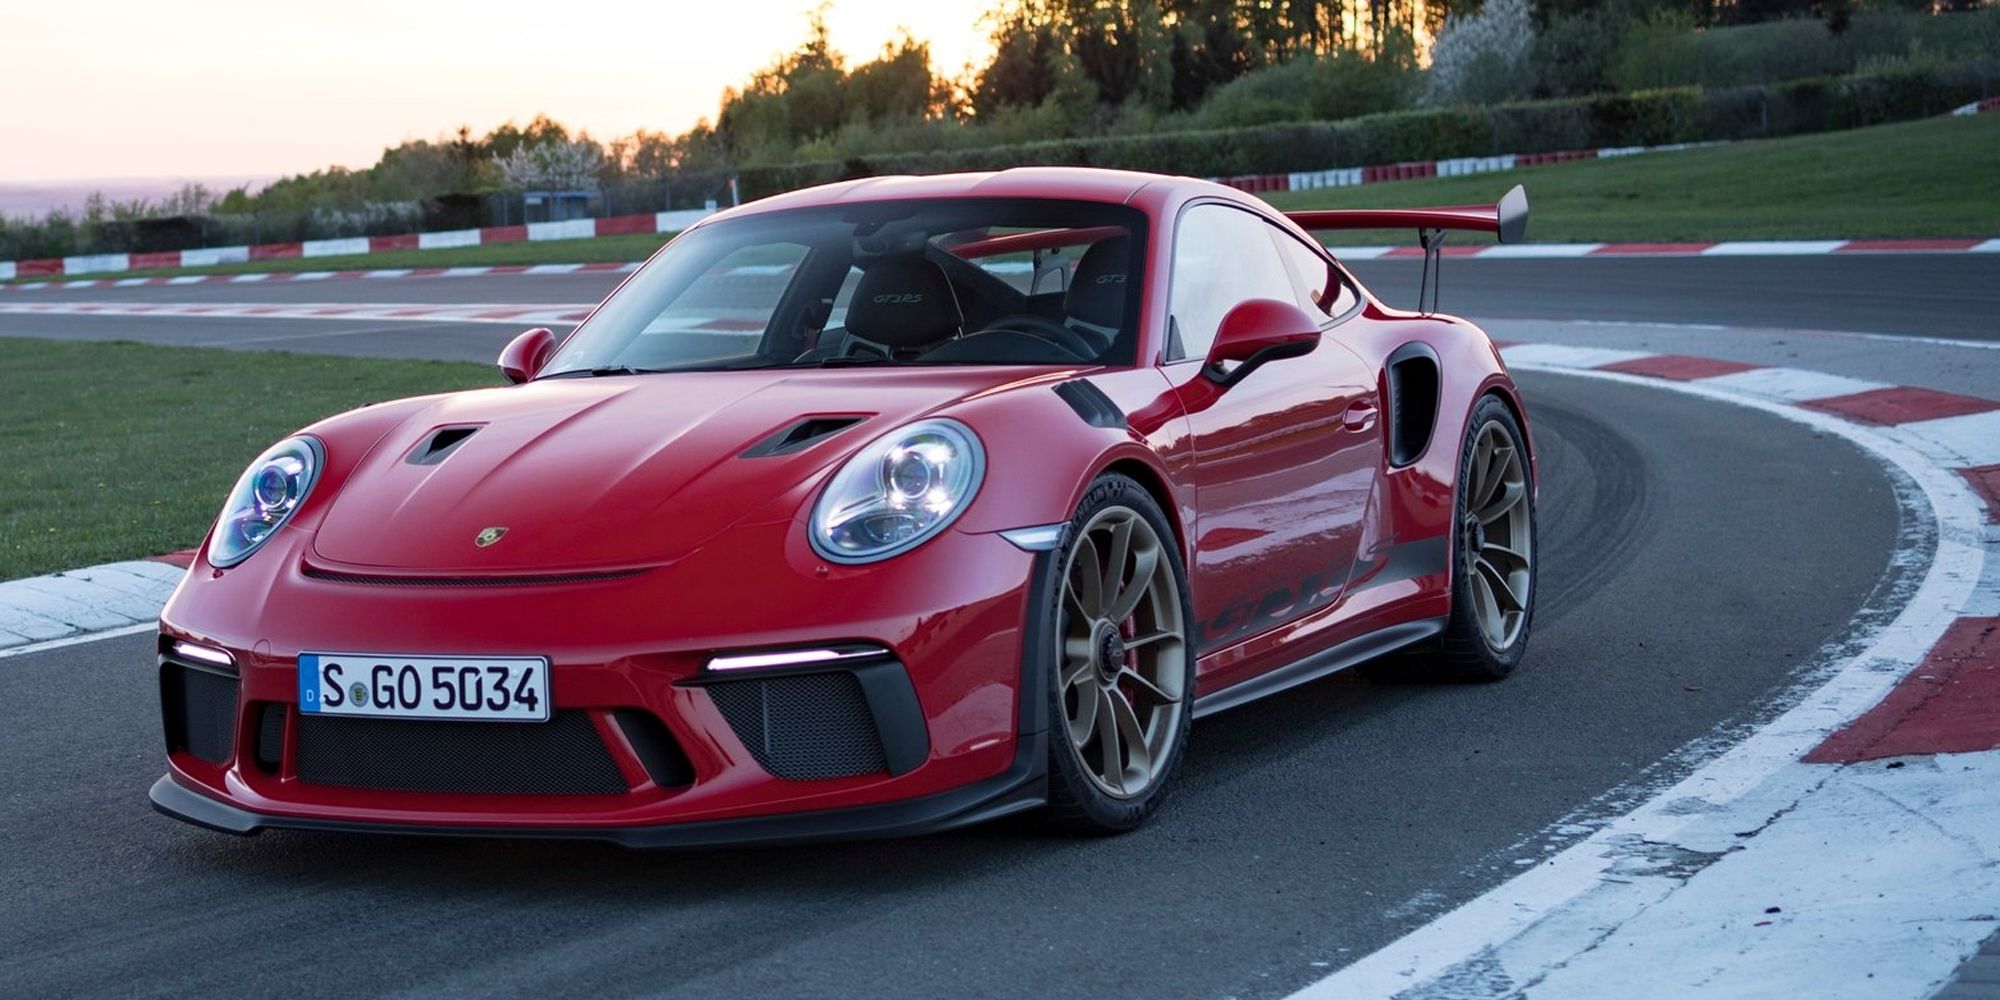 Front 3/4 view of a red GT3 RS on the race track